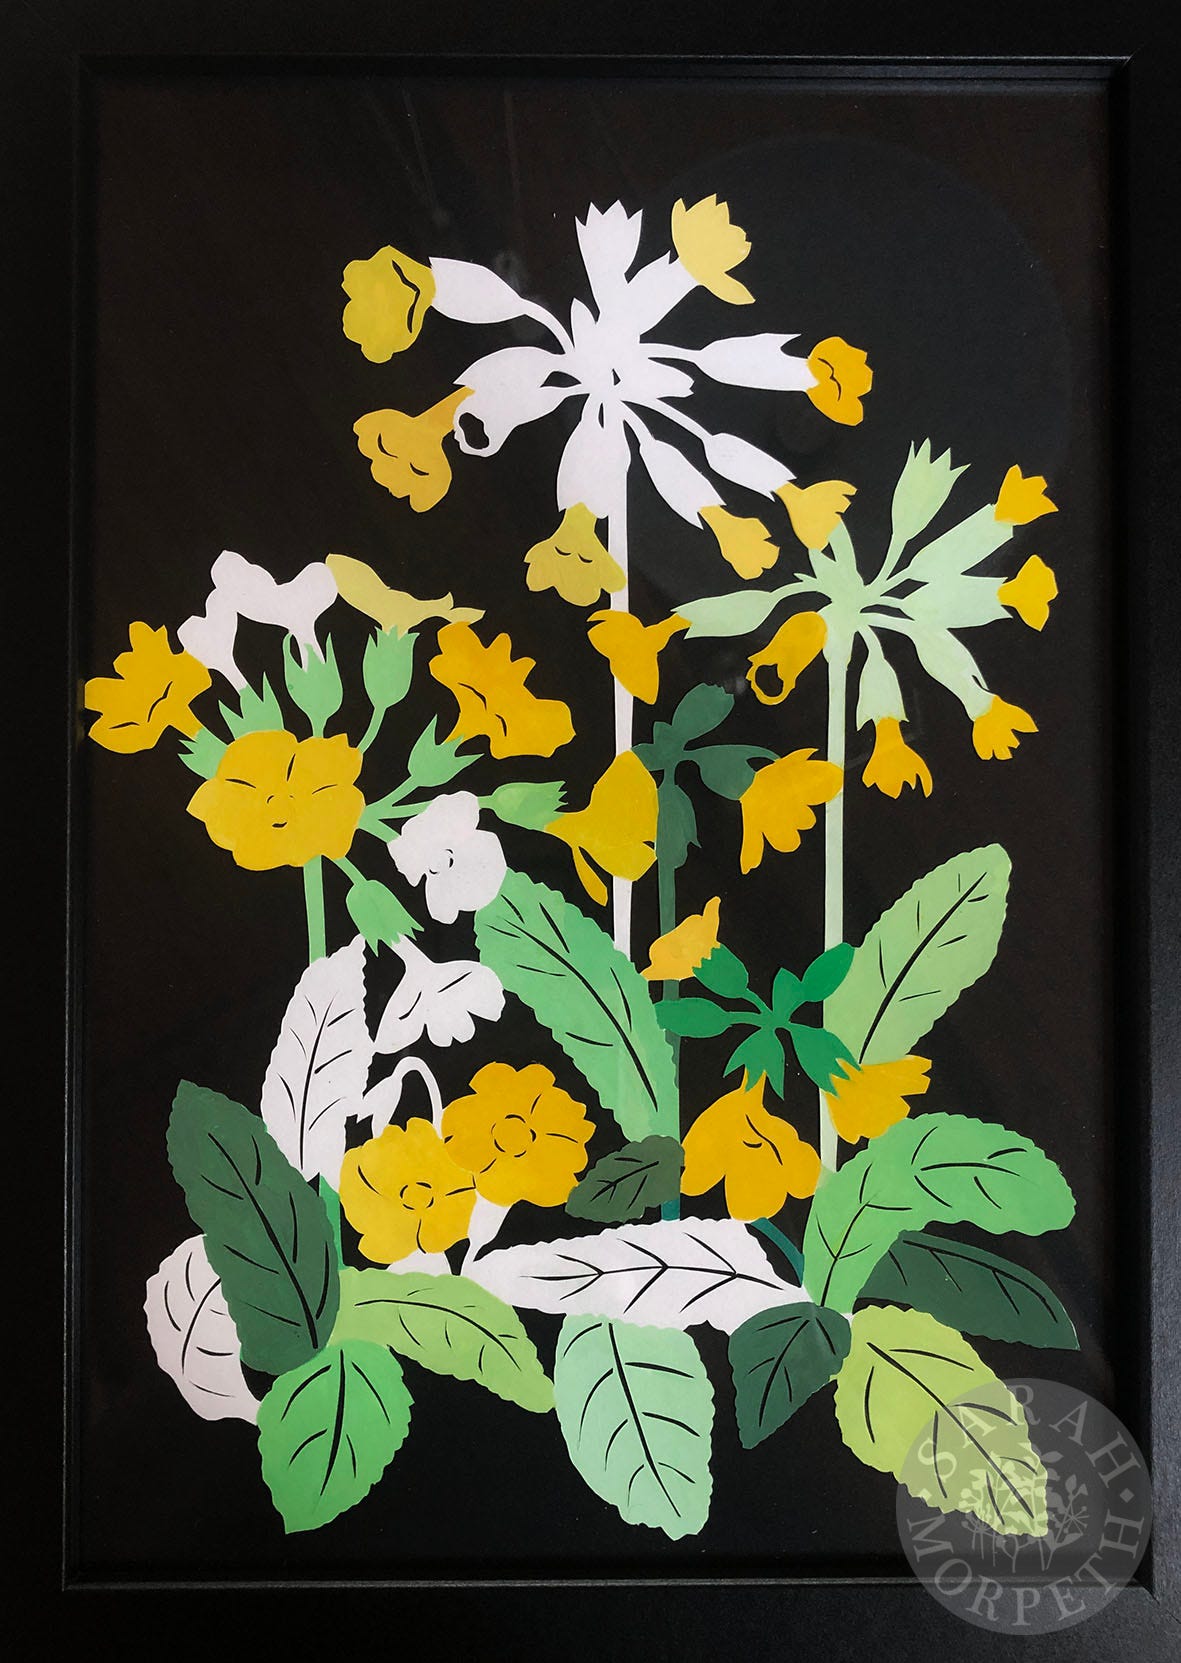 primrose papercut with bright yellow flowers on black background